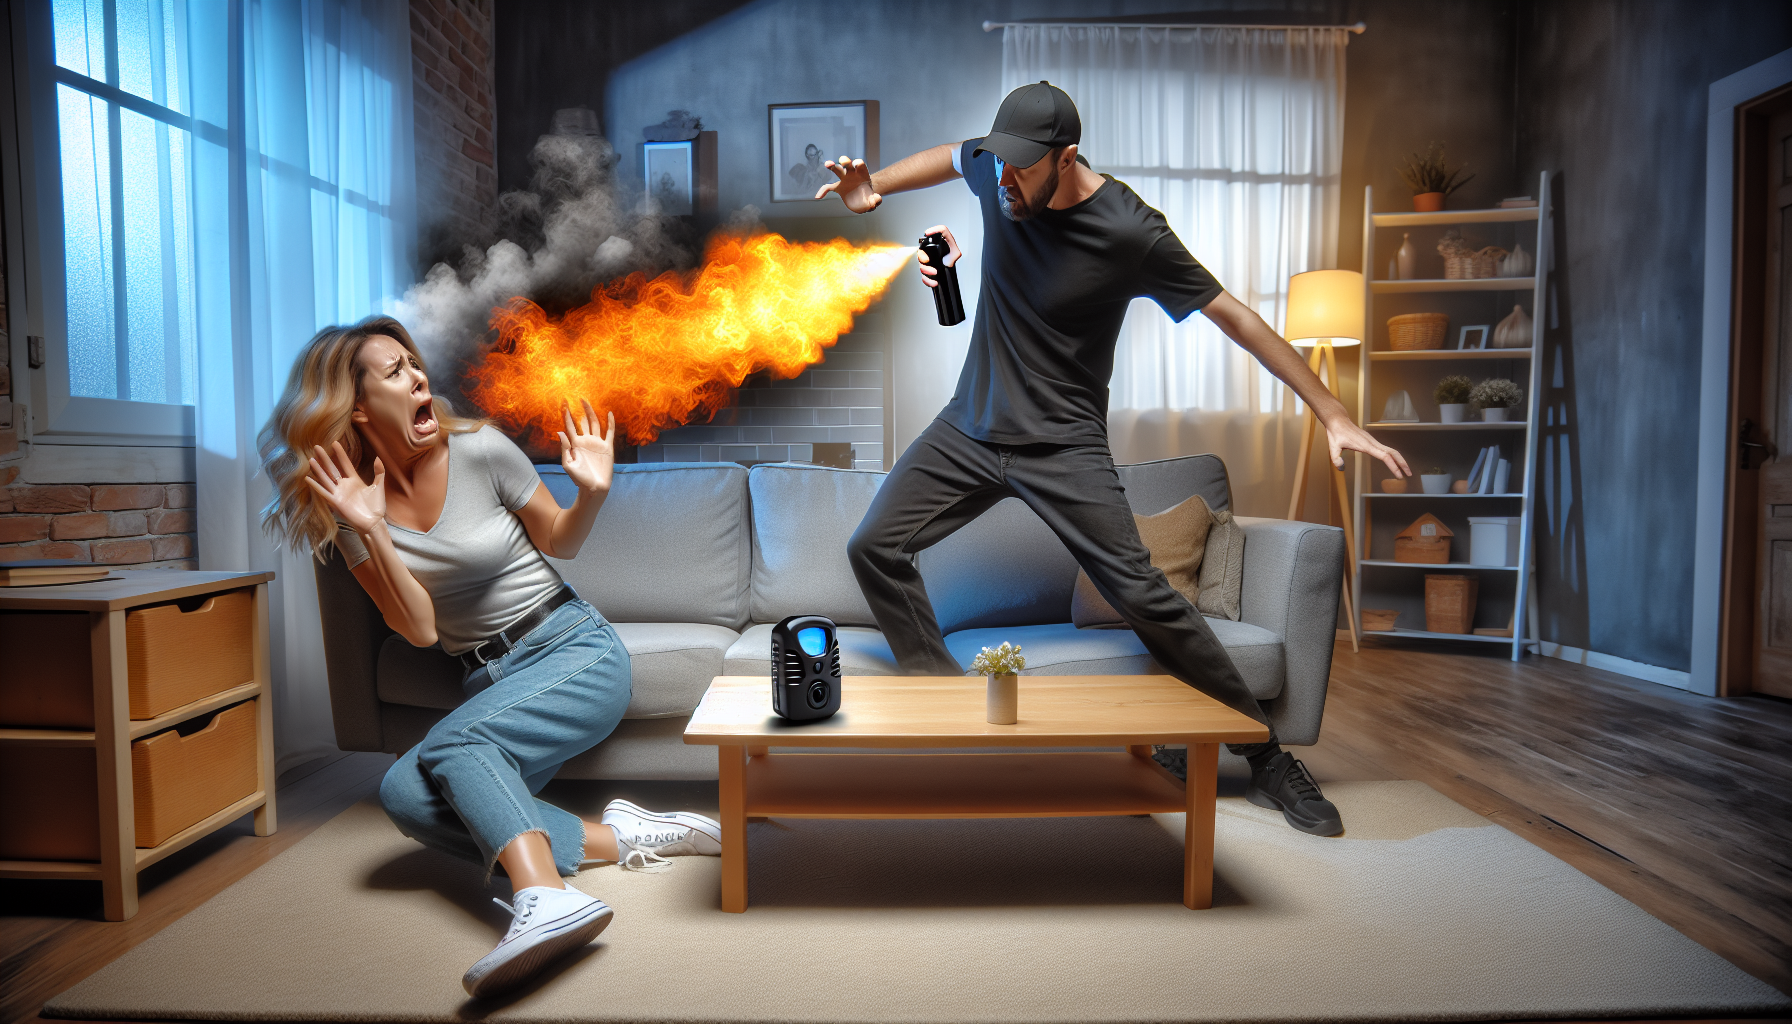 A home invasion scenario with a person using non-lethal self-defense options